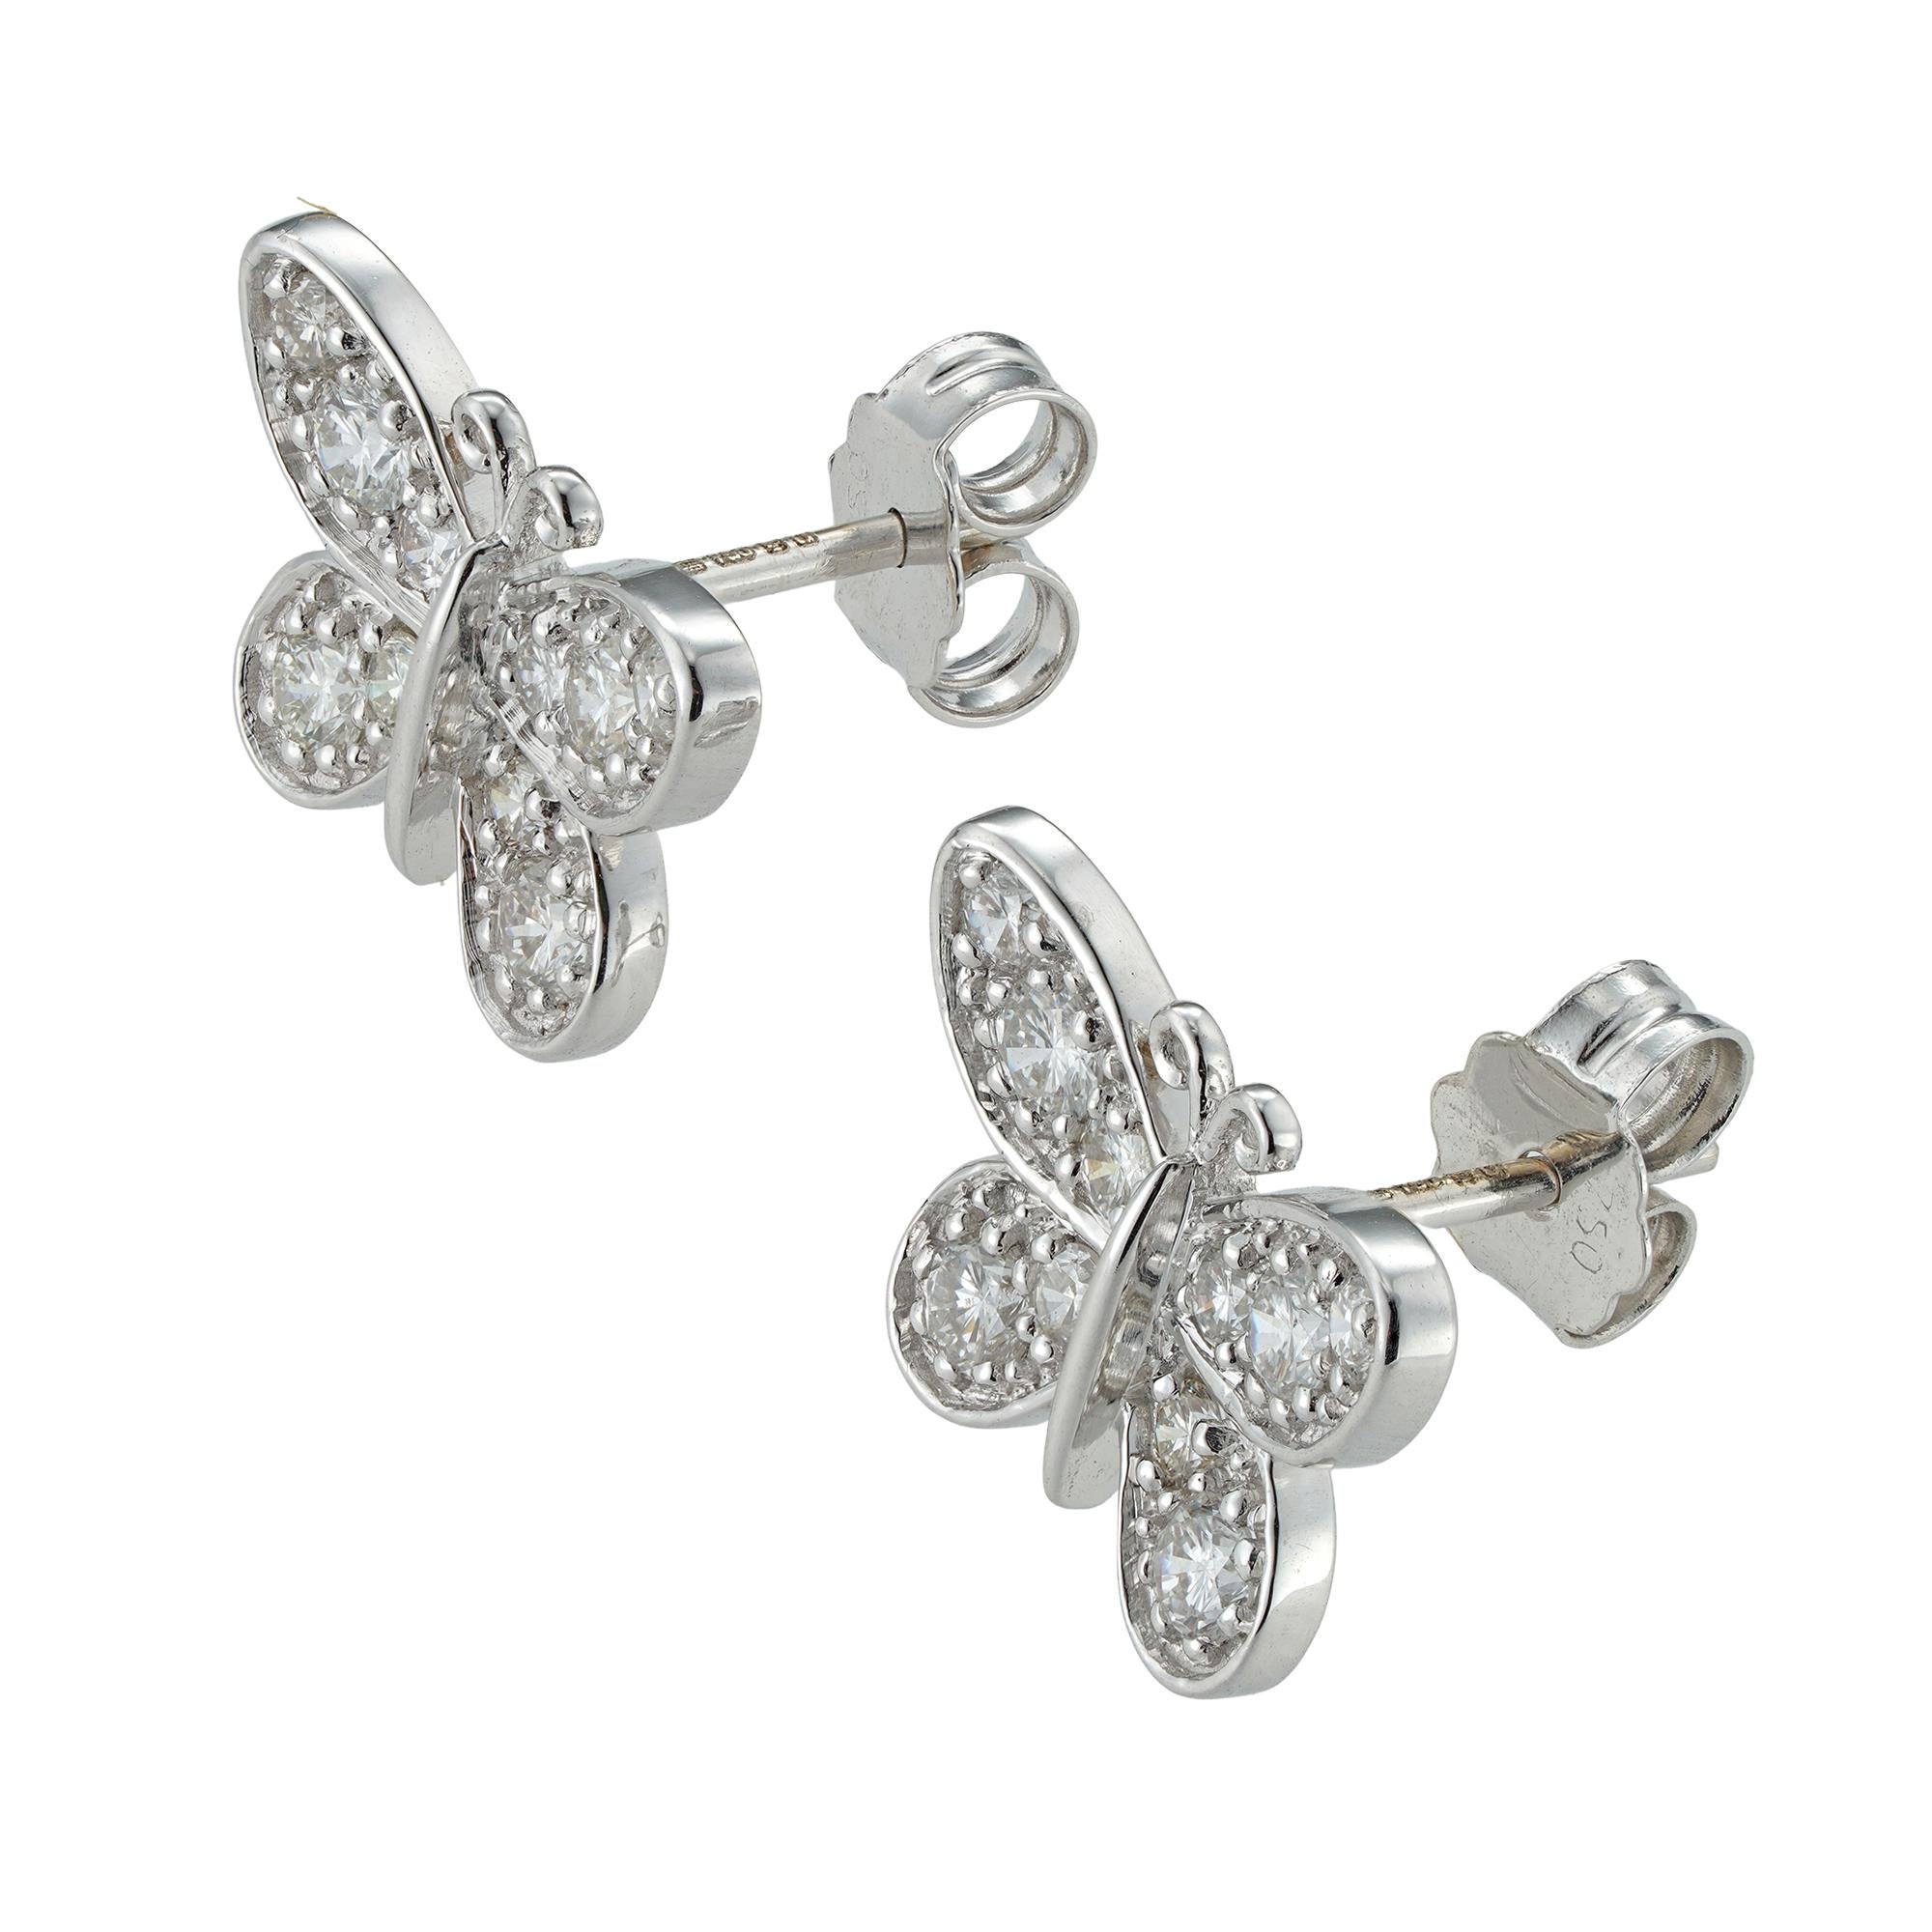 A pair of diamond-set butterfly earrings, the wings of each butterfly grain-set with ten round brilliant-cut diamonds, all diamonds weighing 0.7 carats in total, mounted in 18ct white gold mount with post and scroll fittings, hallmarked 18ct gold